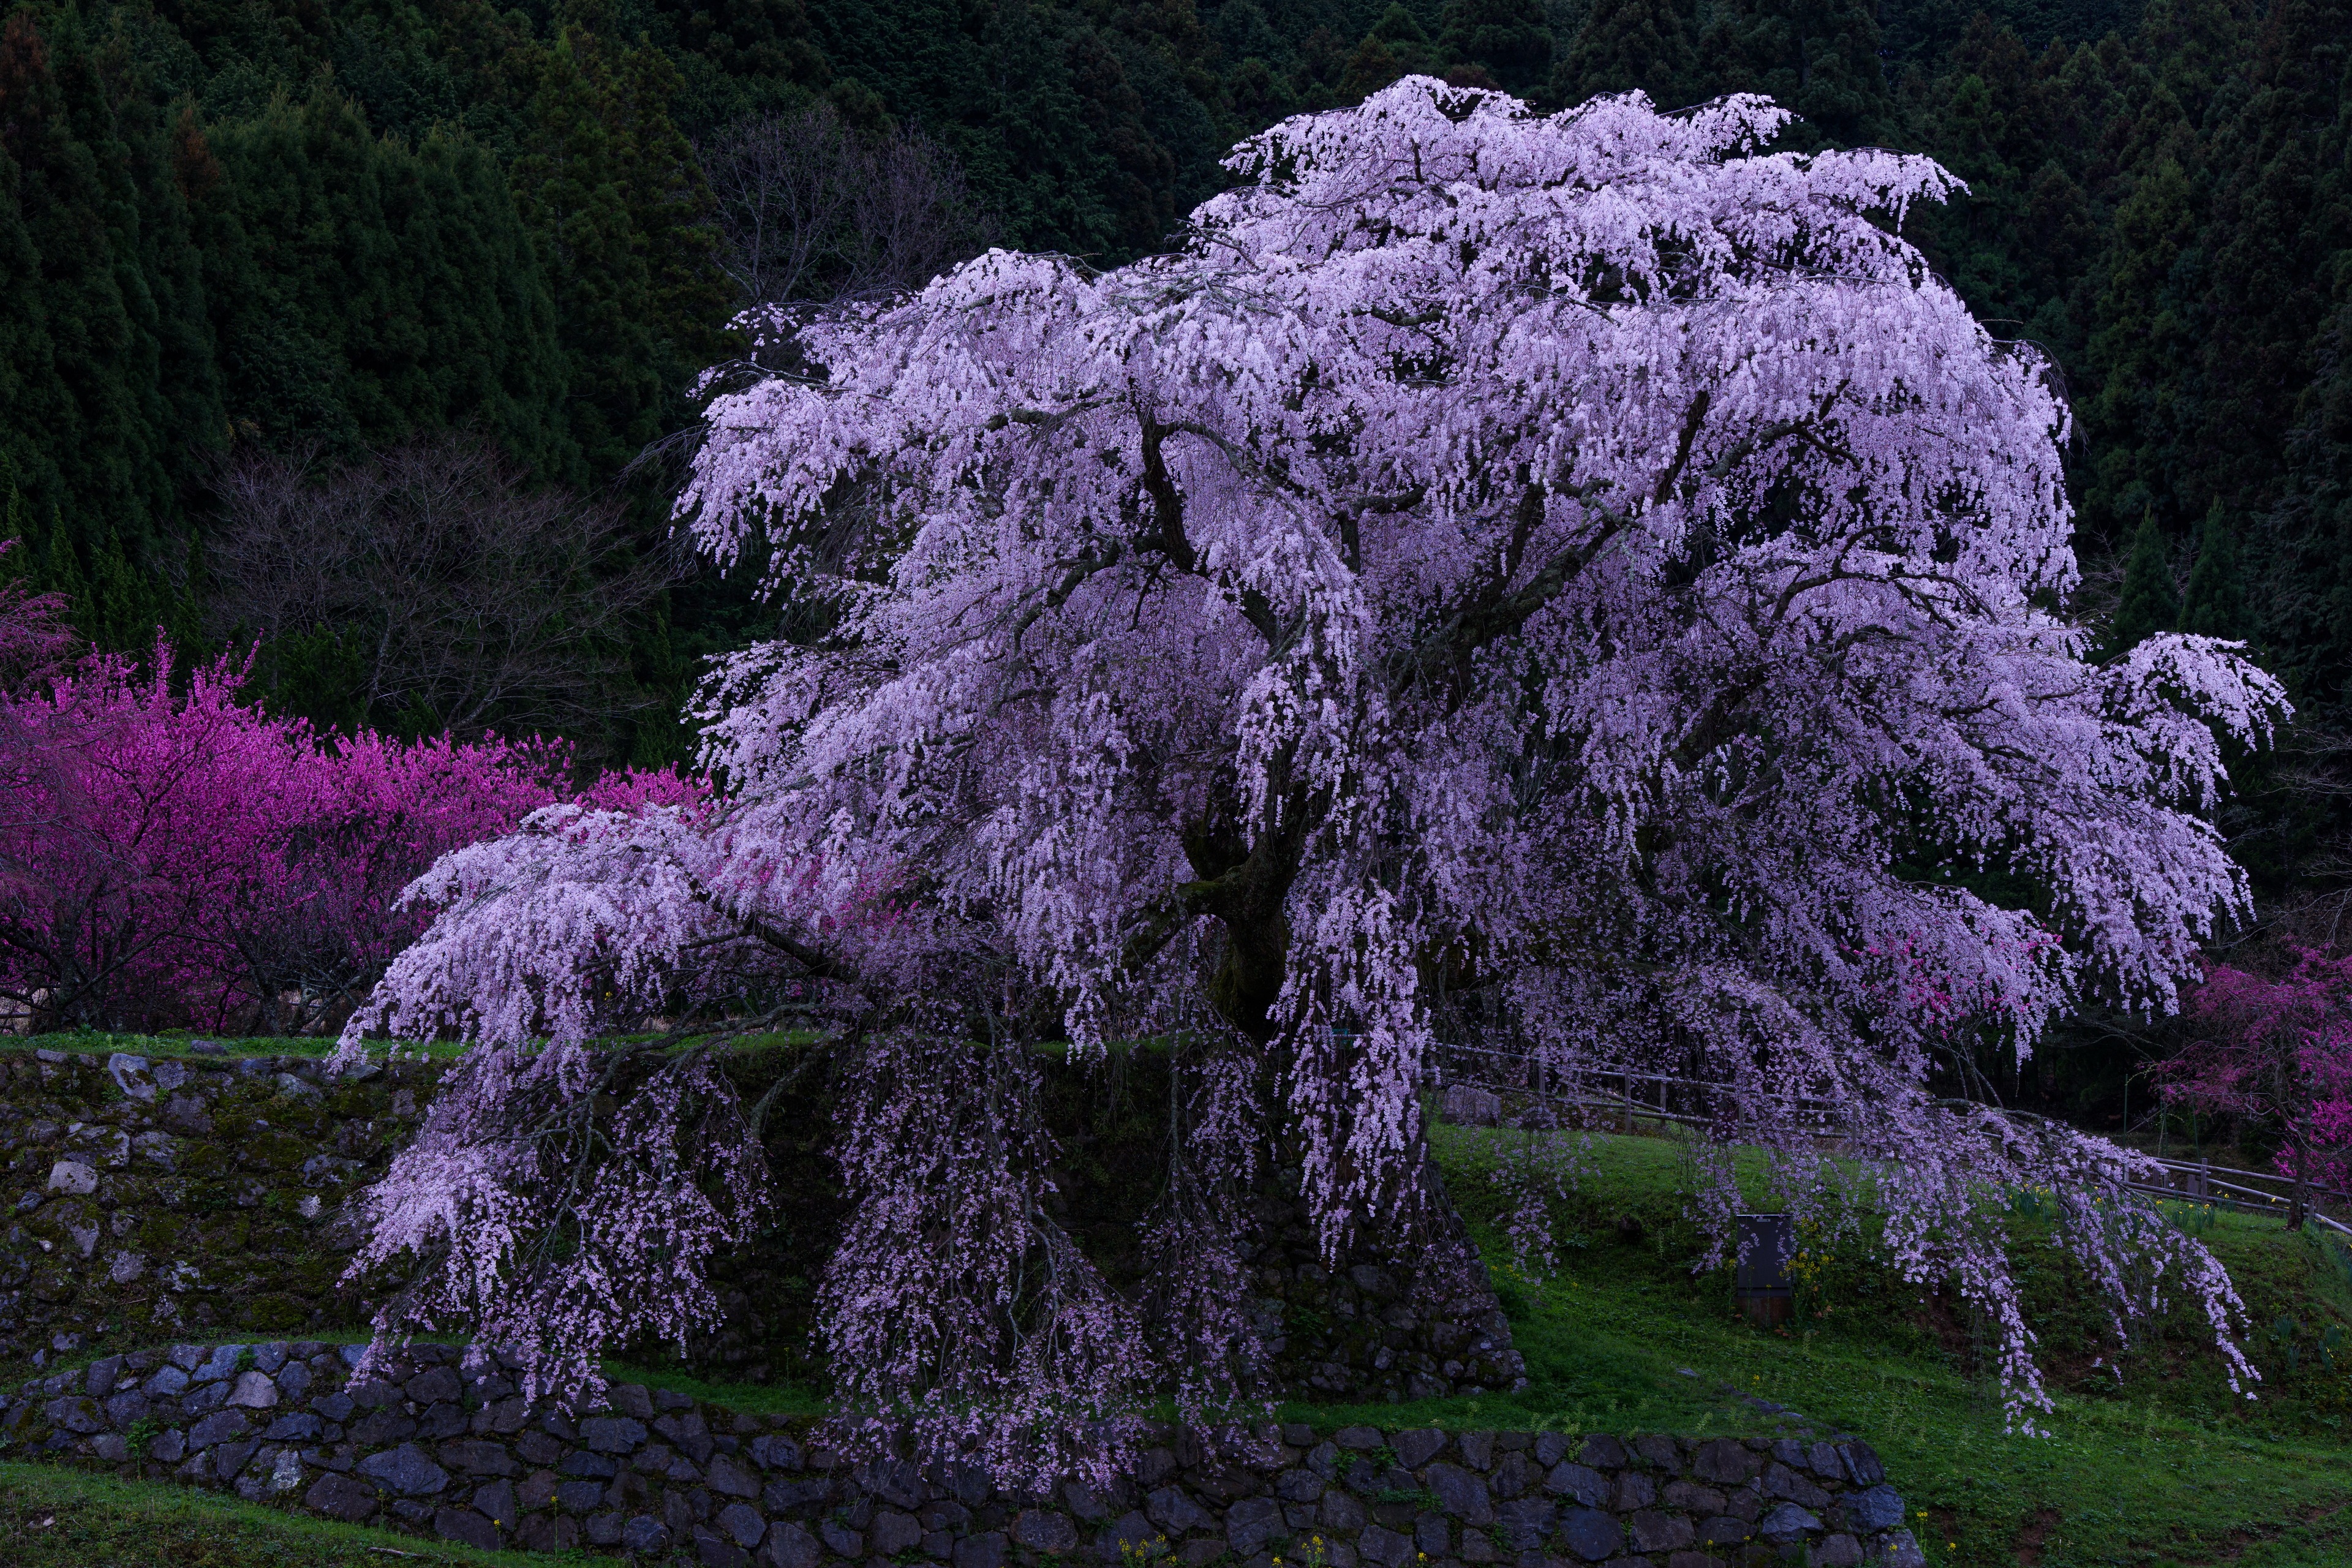 General 3840x2560 trees flowers garden spring nature